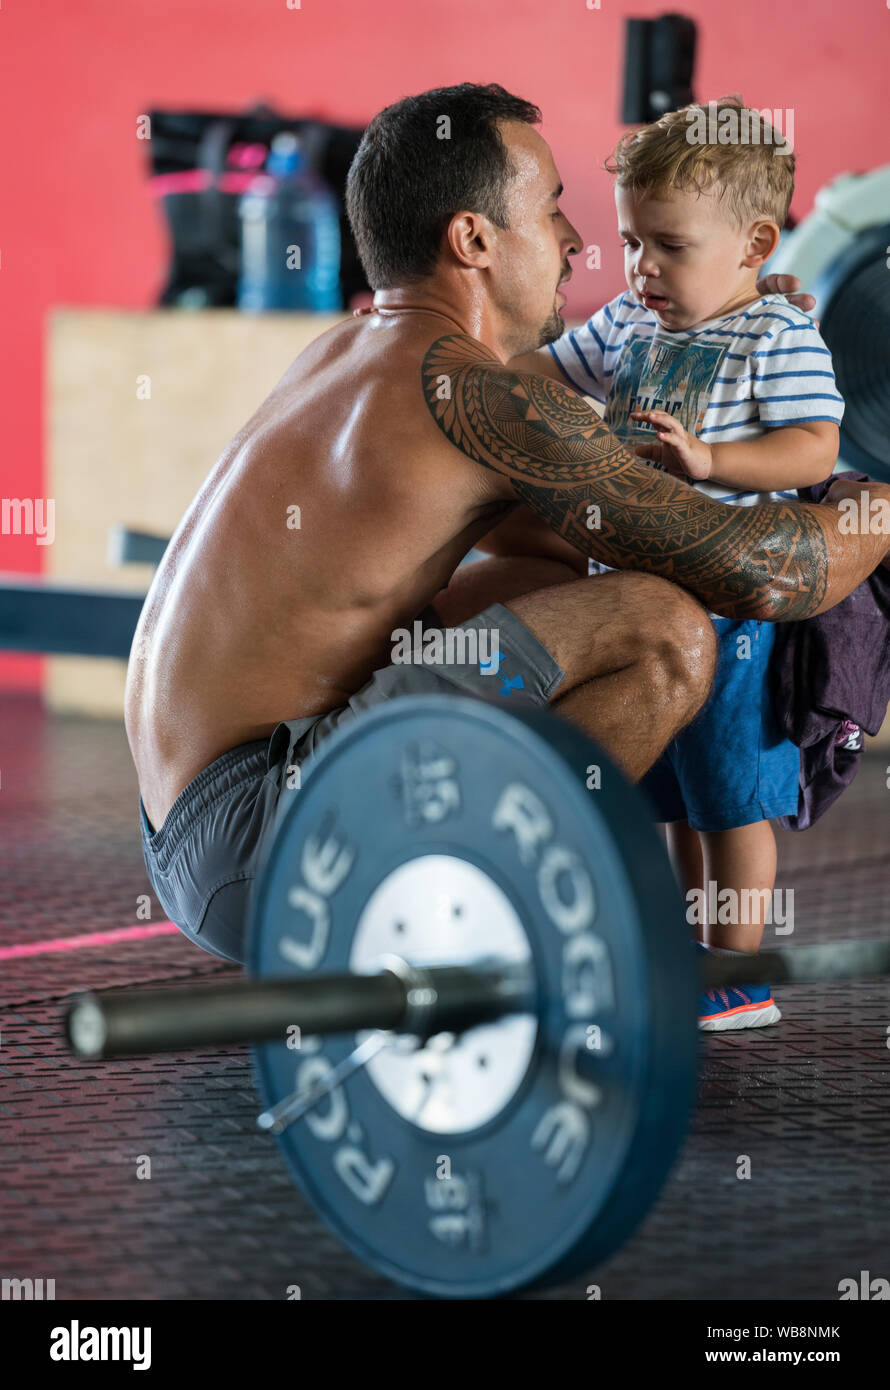 A mixed race athlete is jugging a mixed race child in the gym after weightlifting competition Stock Photo